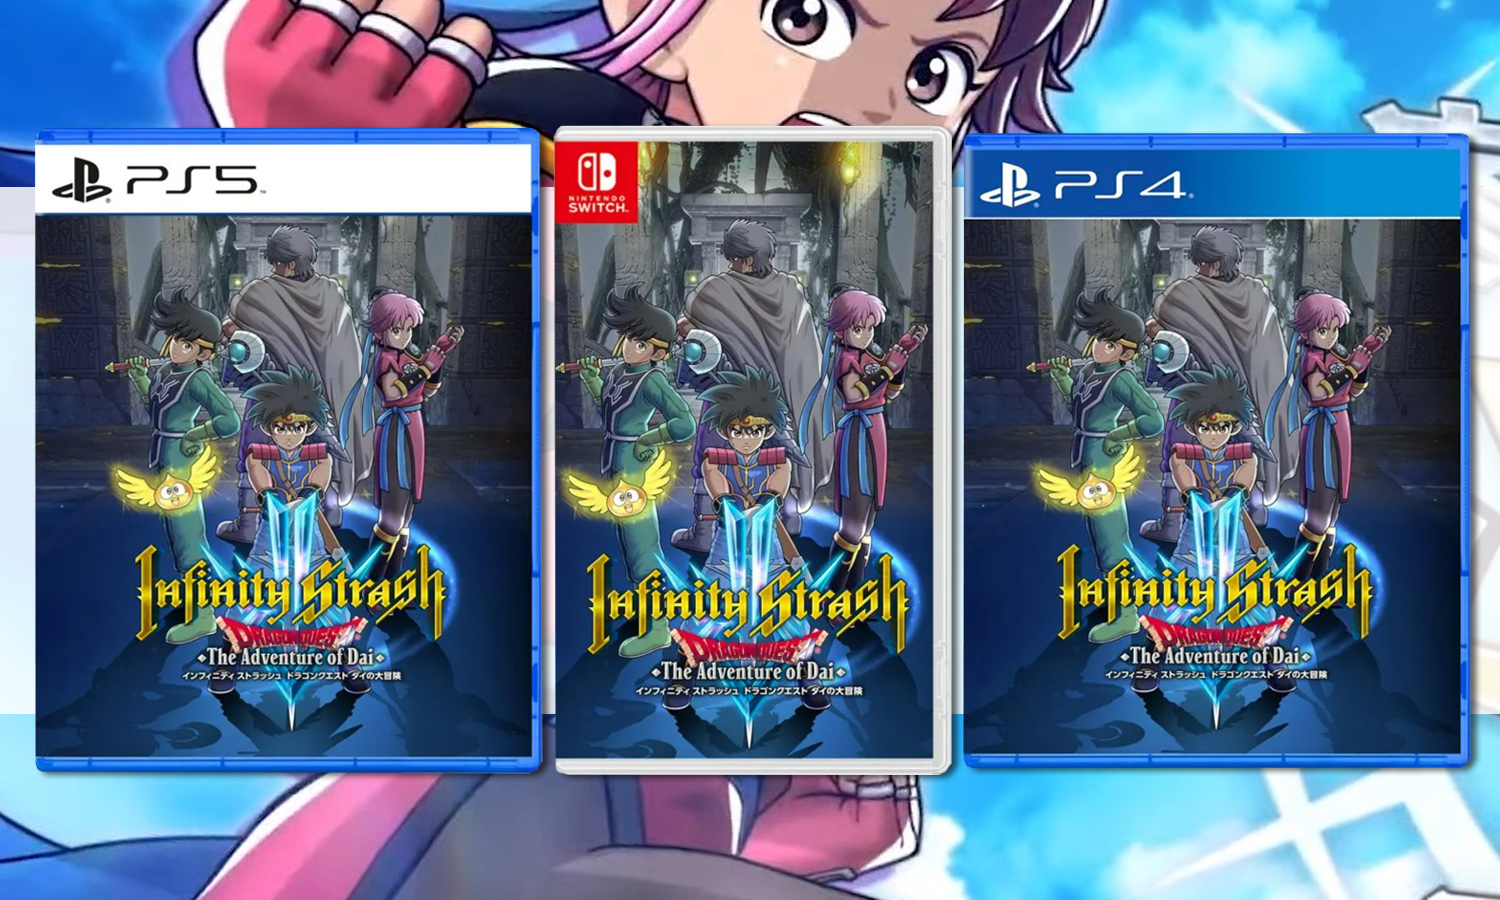 slider dragon quest infinity strash multi ps4 ps5 switch